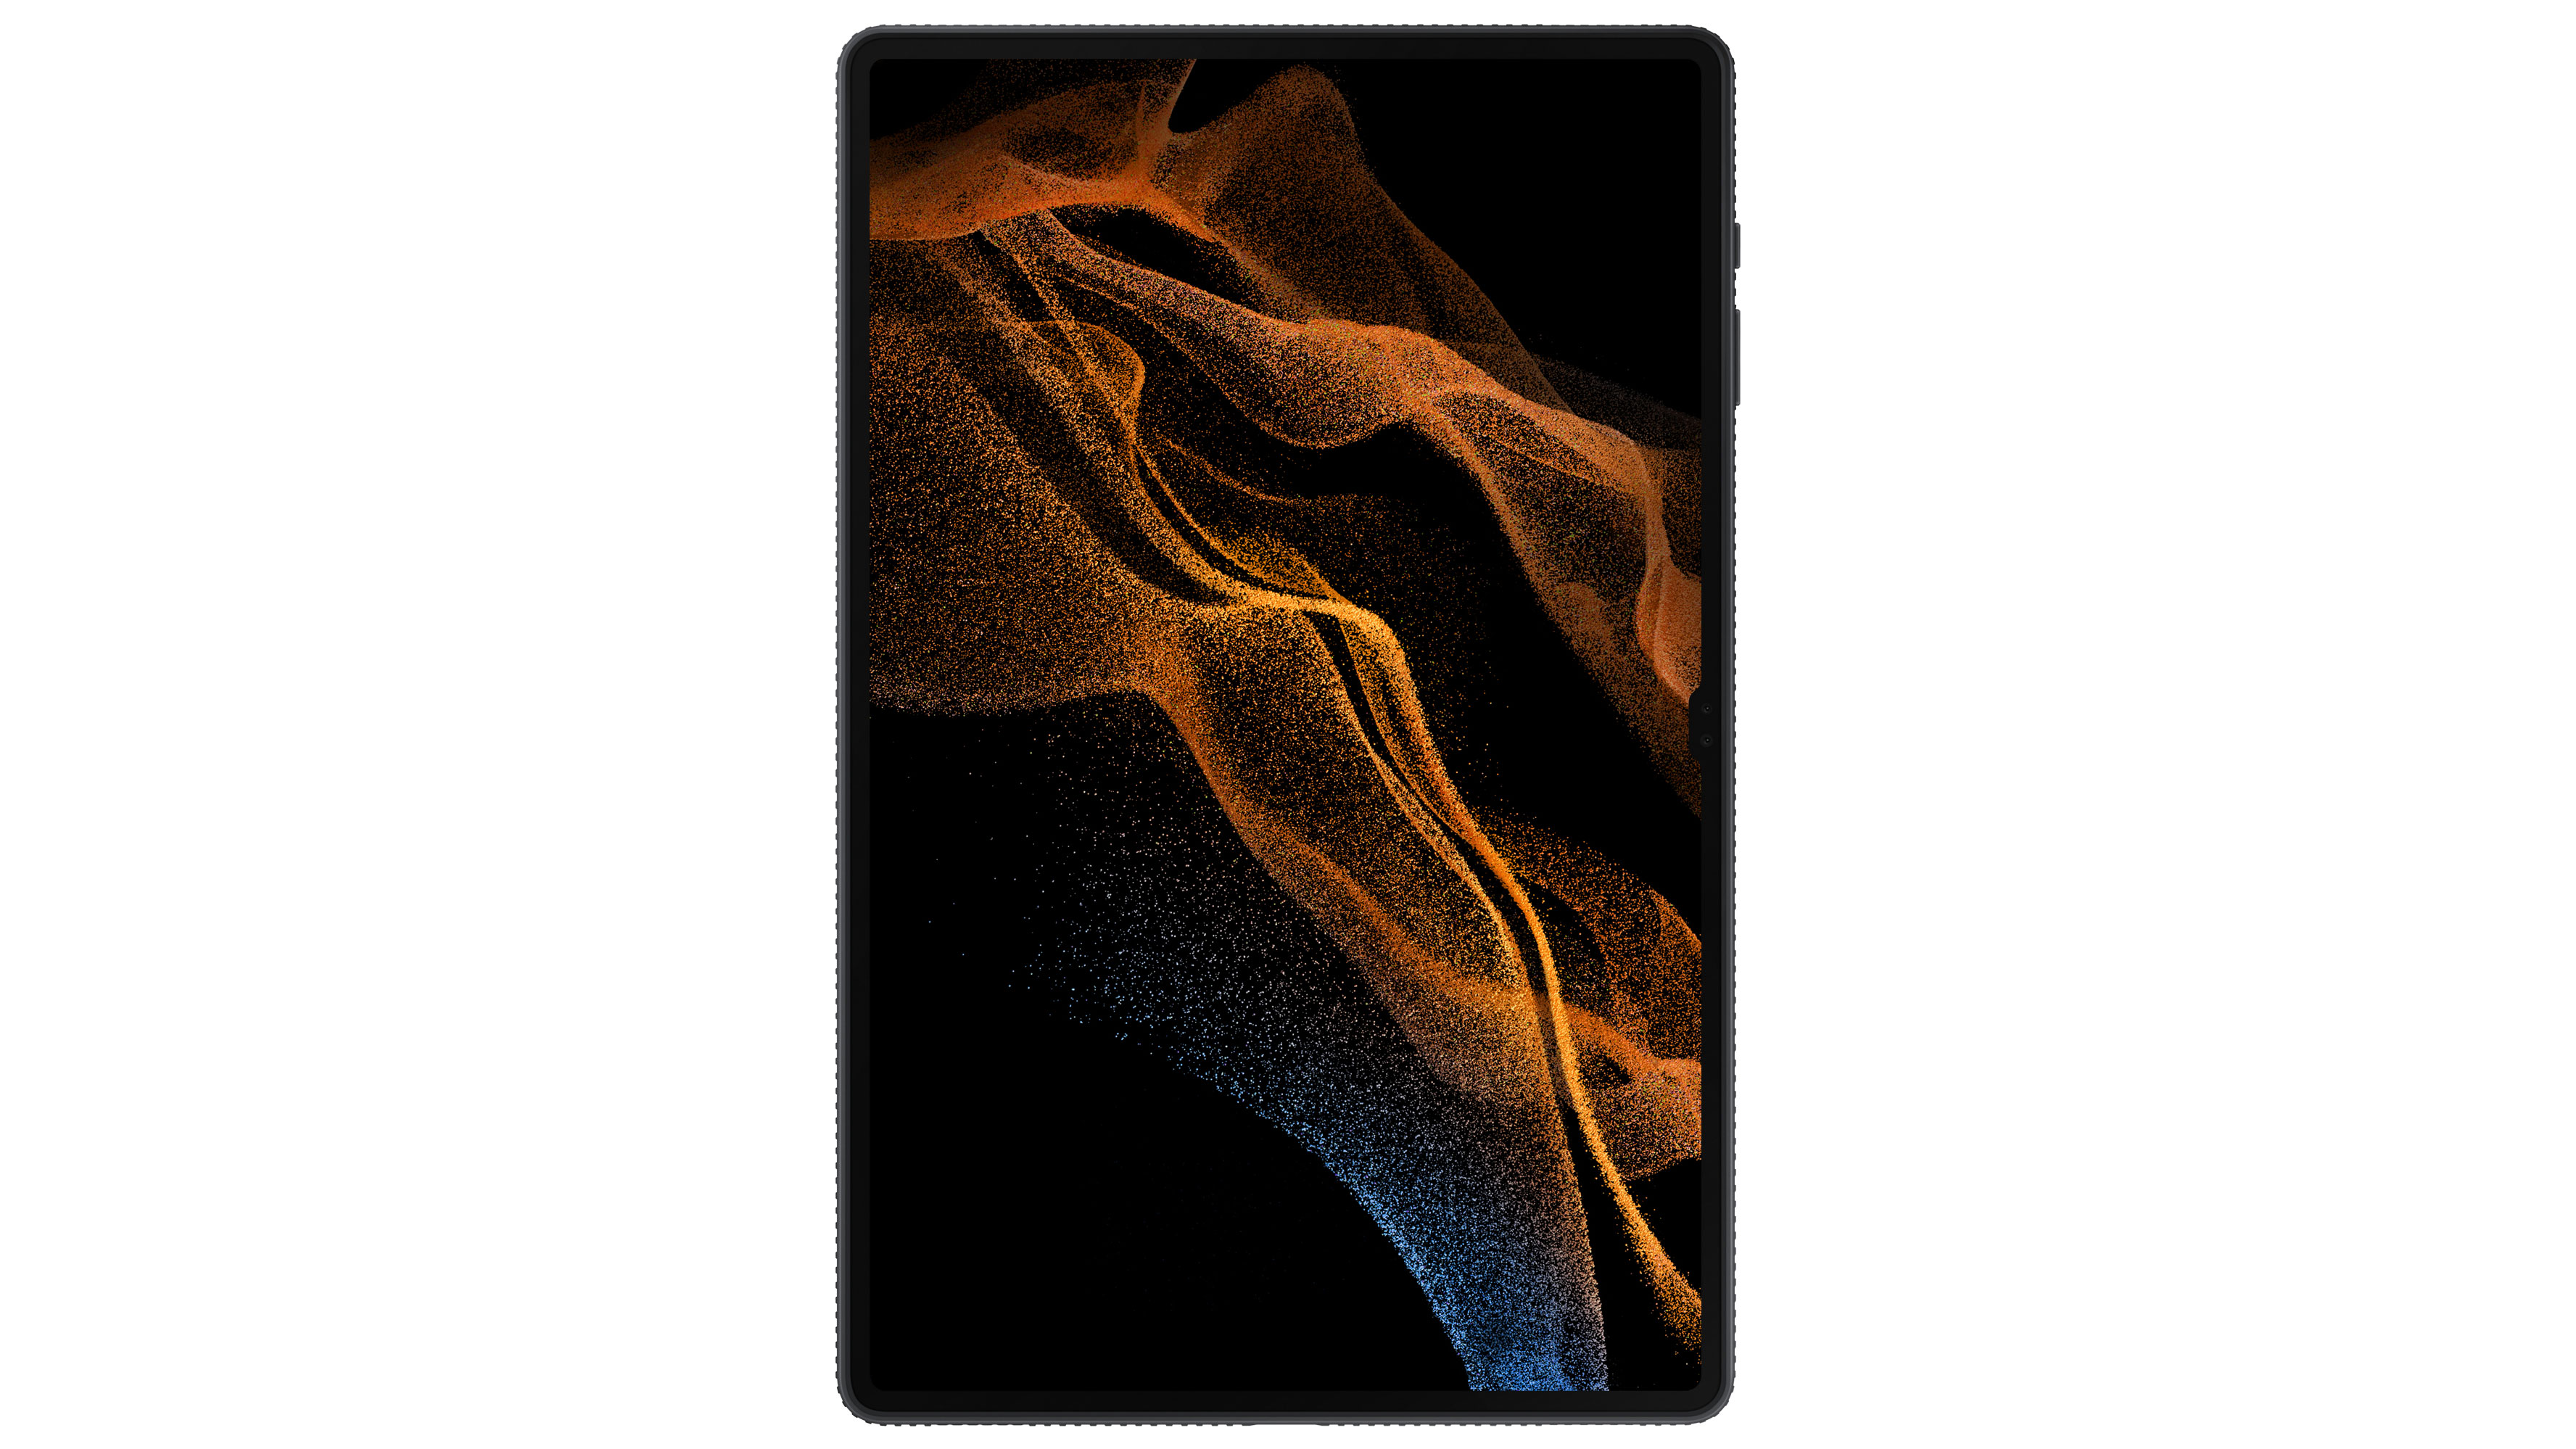 Galaxy Tab S8 in a portrait orientation with the screen on, against a white background